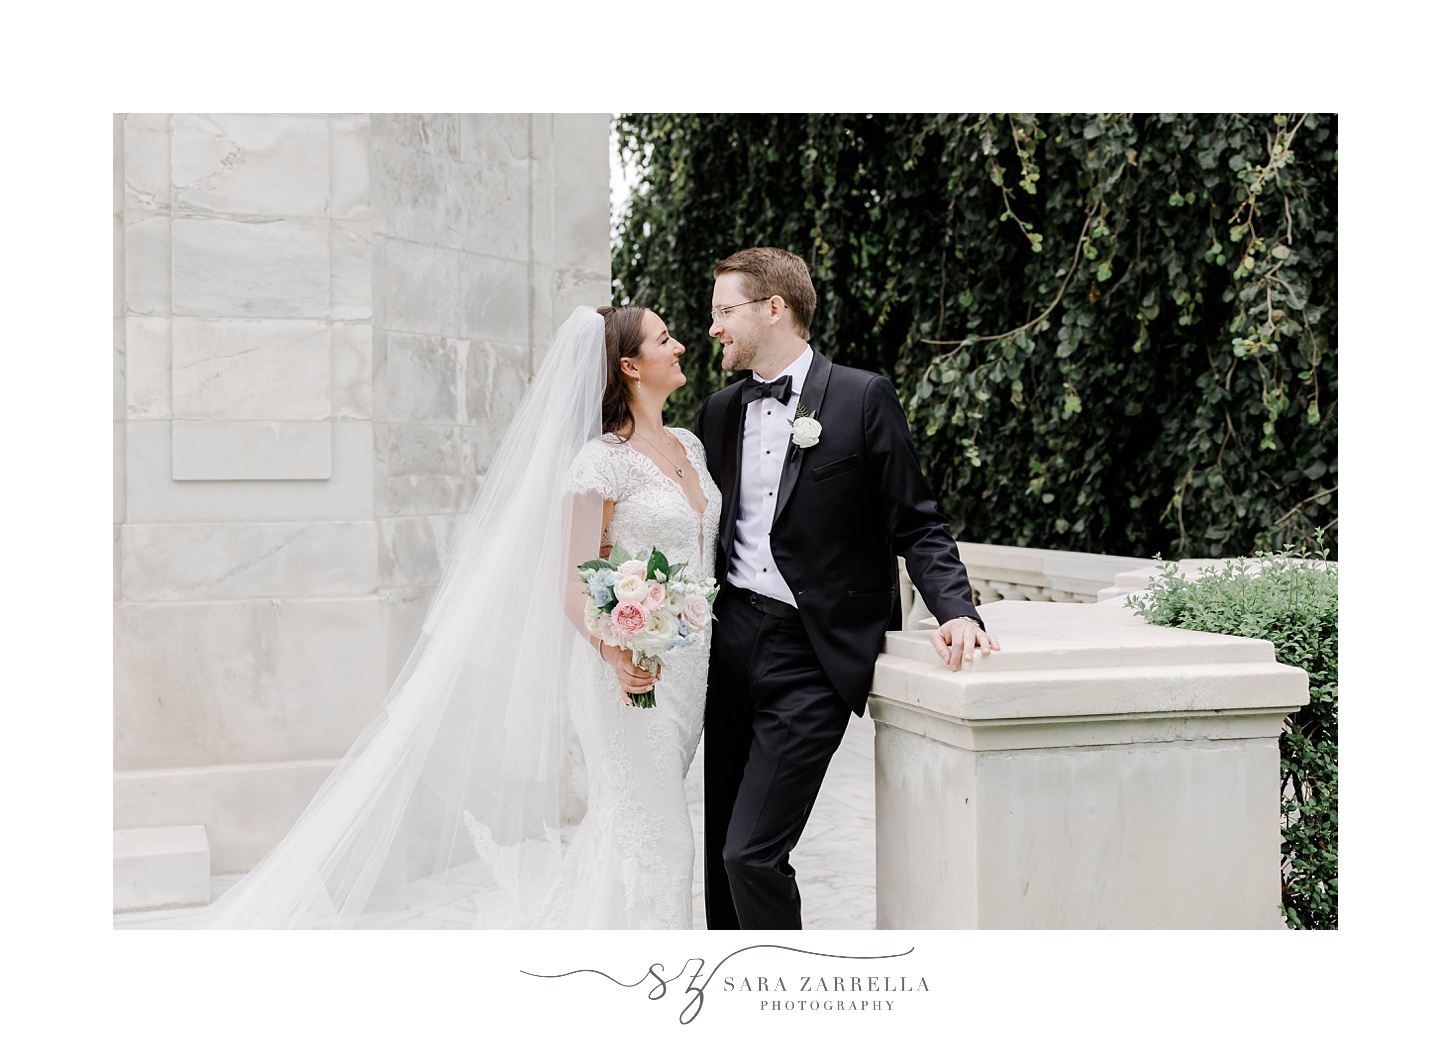 newlyweds smile together during portraits against marble walls at The Elms